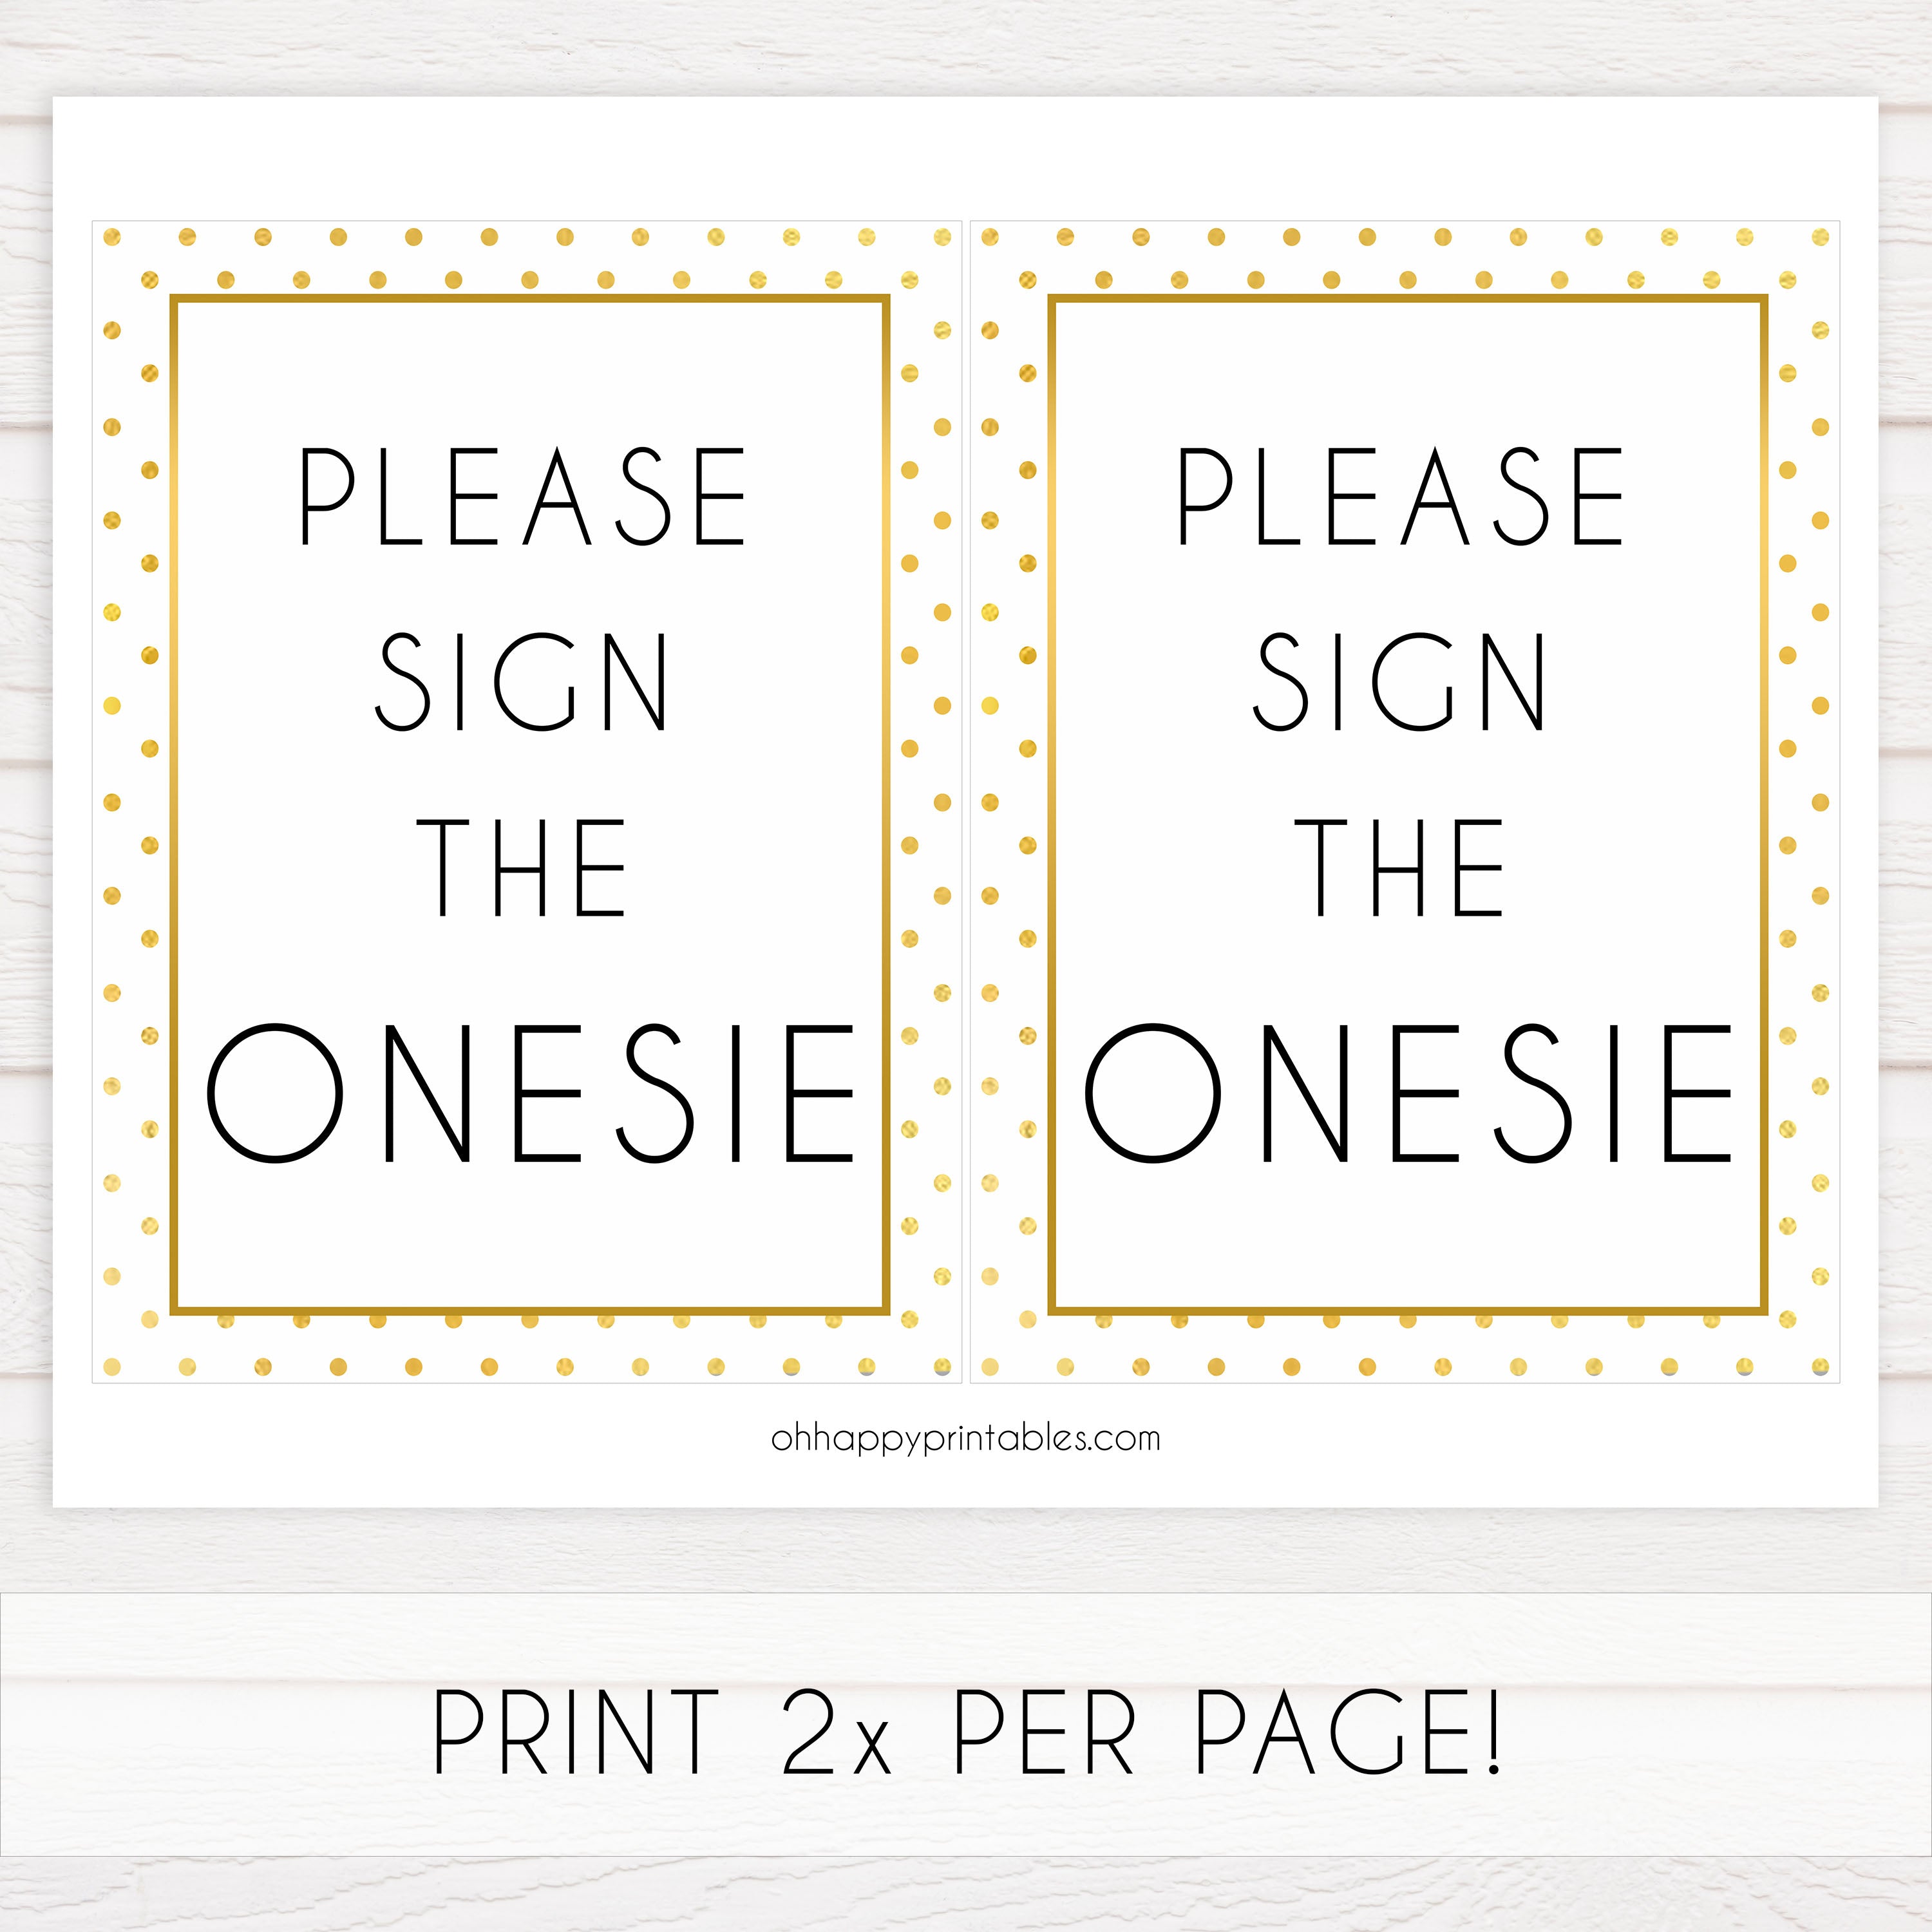 please sign the onesie game, sign the onesie, Printable baby shower games, baby gold dots fun baby games, baby shower games, fun baby shower ideas, top baby shower ideas, gold glitter shower baby shower, friends baby shower ideas